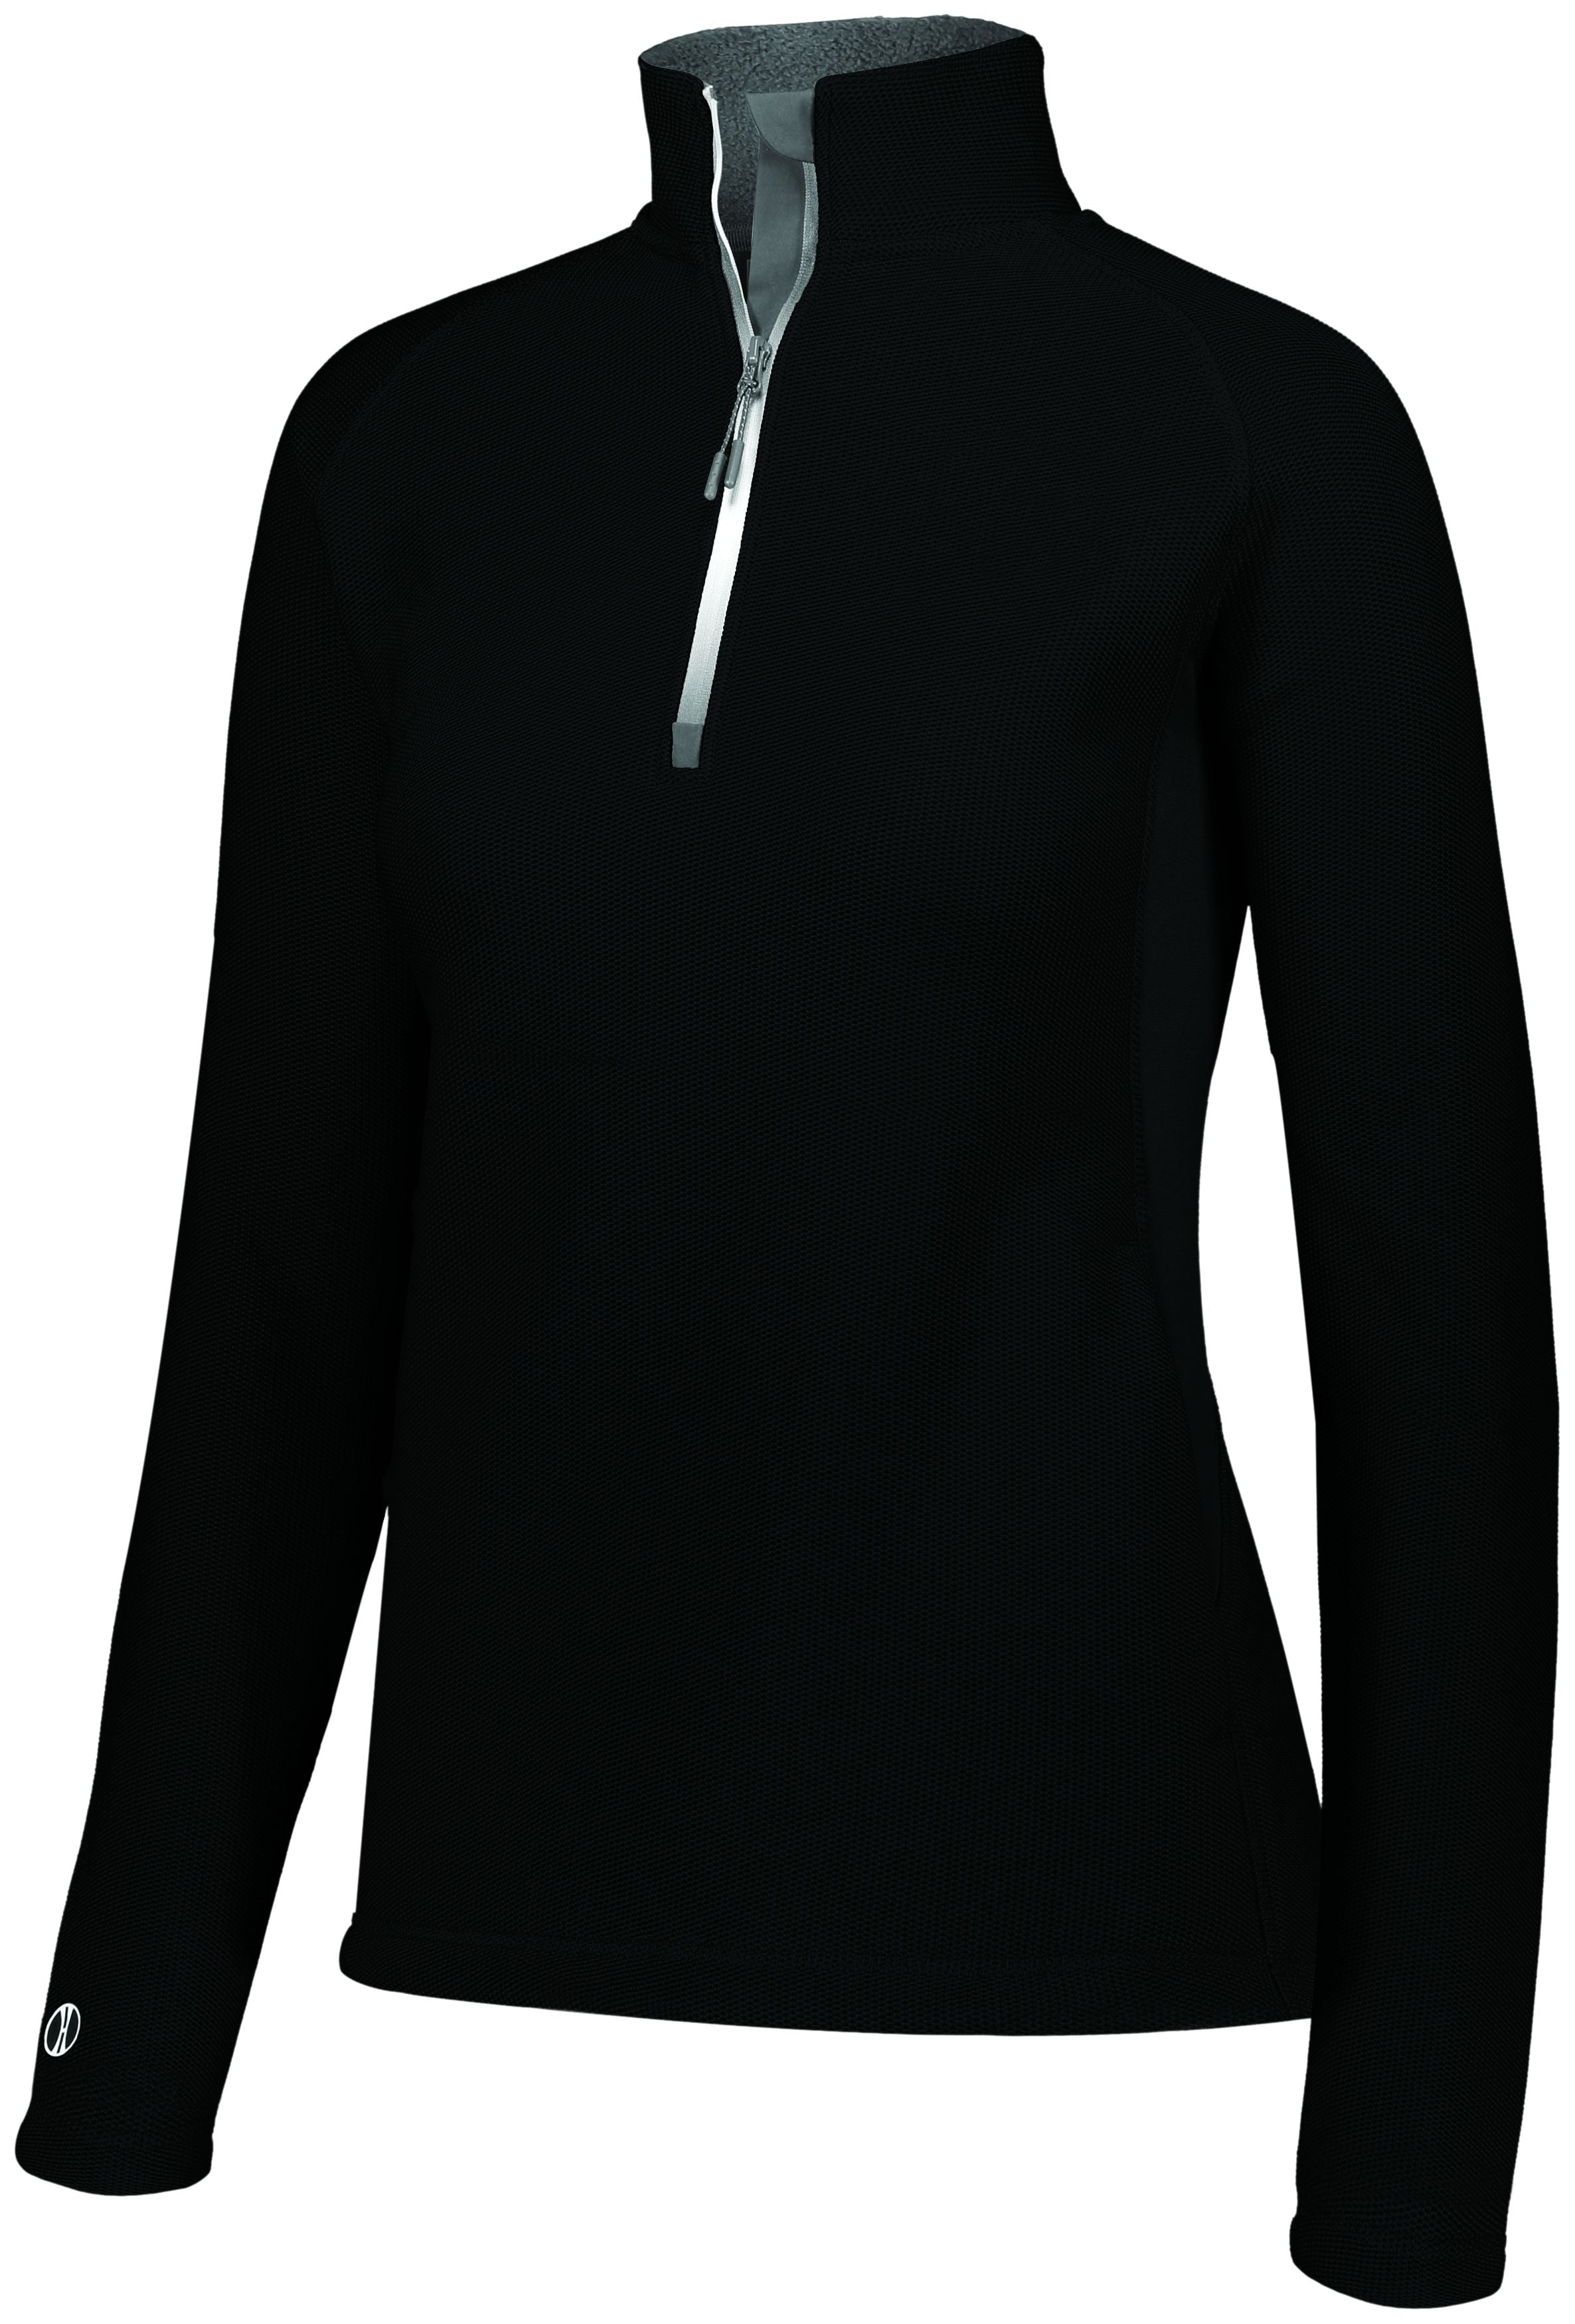 Holloway Ladies Invert 1/2 Zip Pullover in Black  -Part of the Ladies, Ladies-Pullover, Holloway, Outerwear, Invert-Collection product lines at KanaleyCreations.com